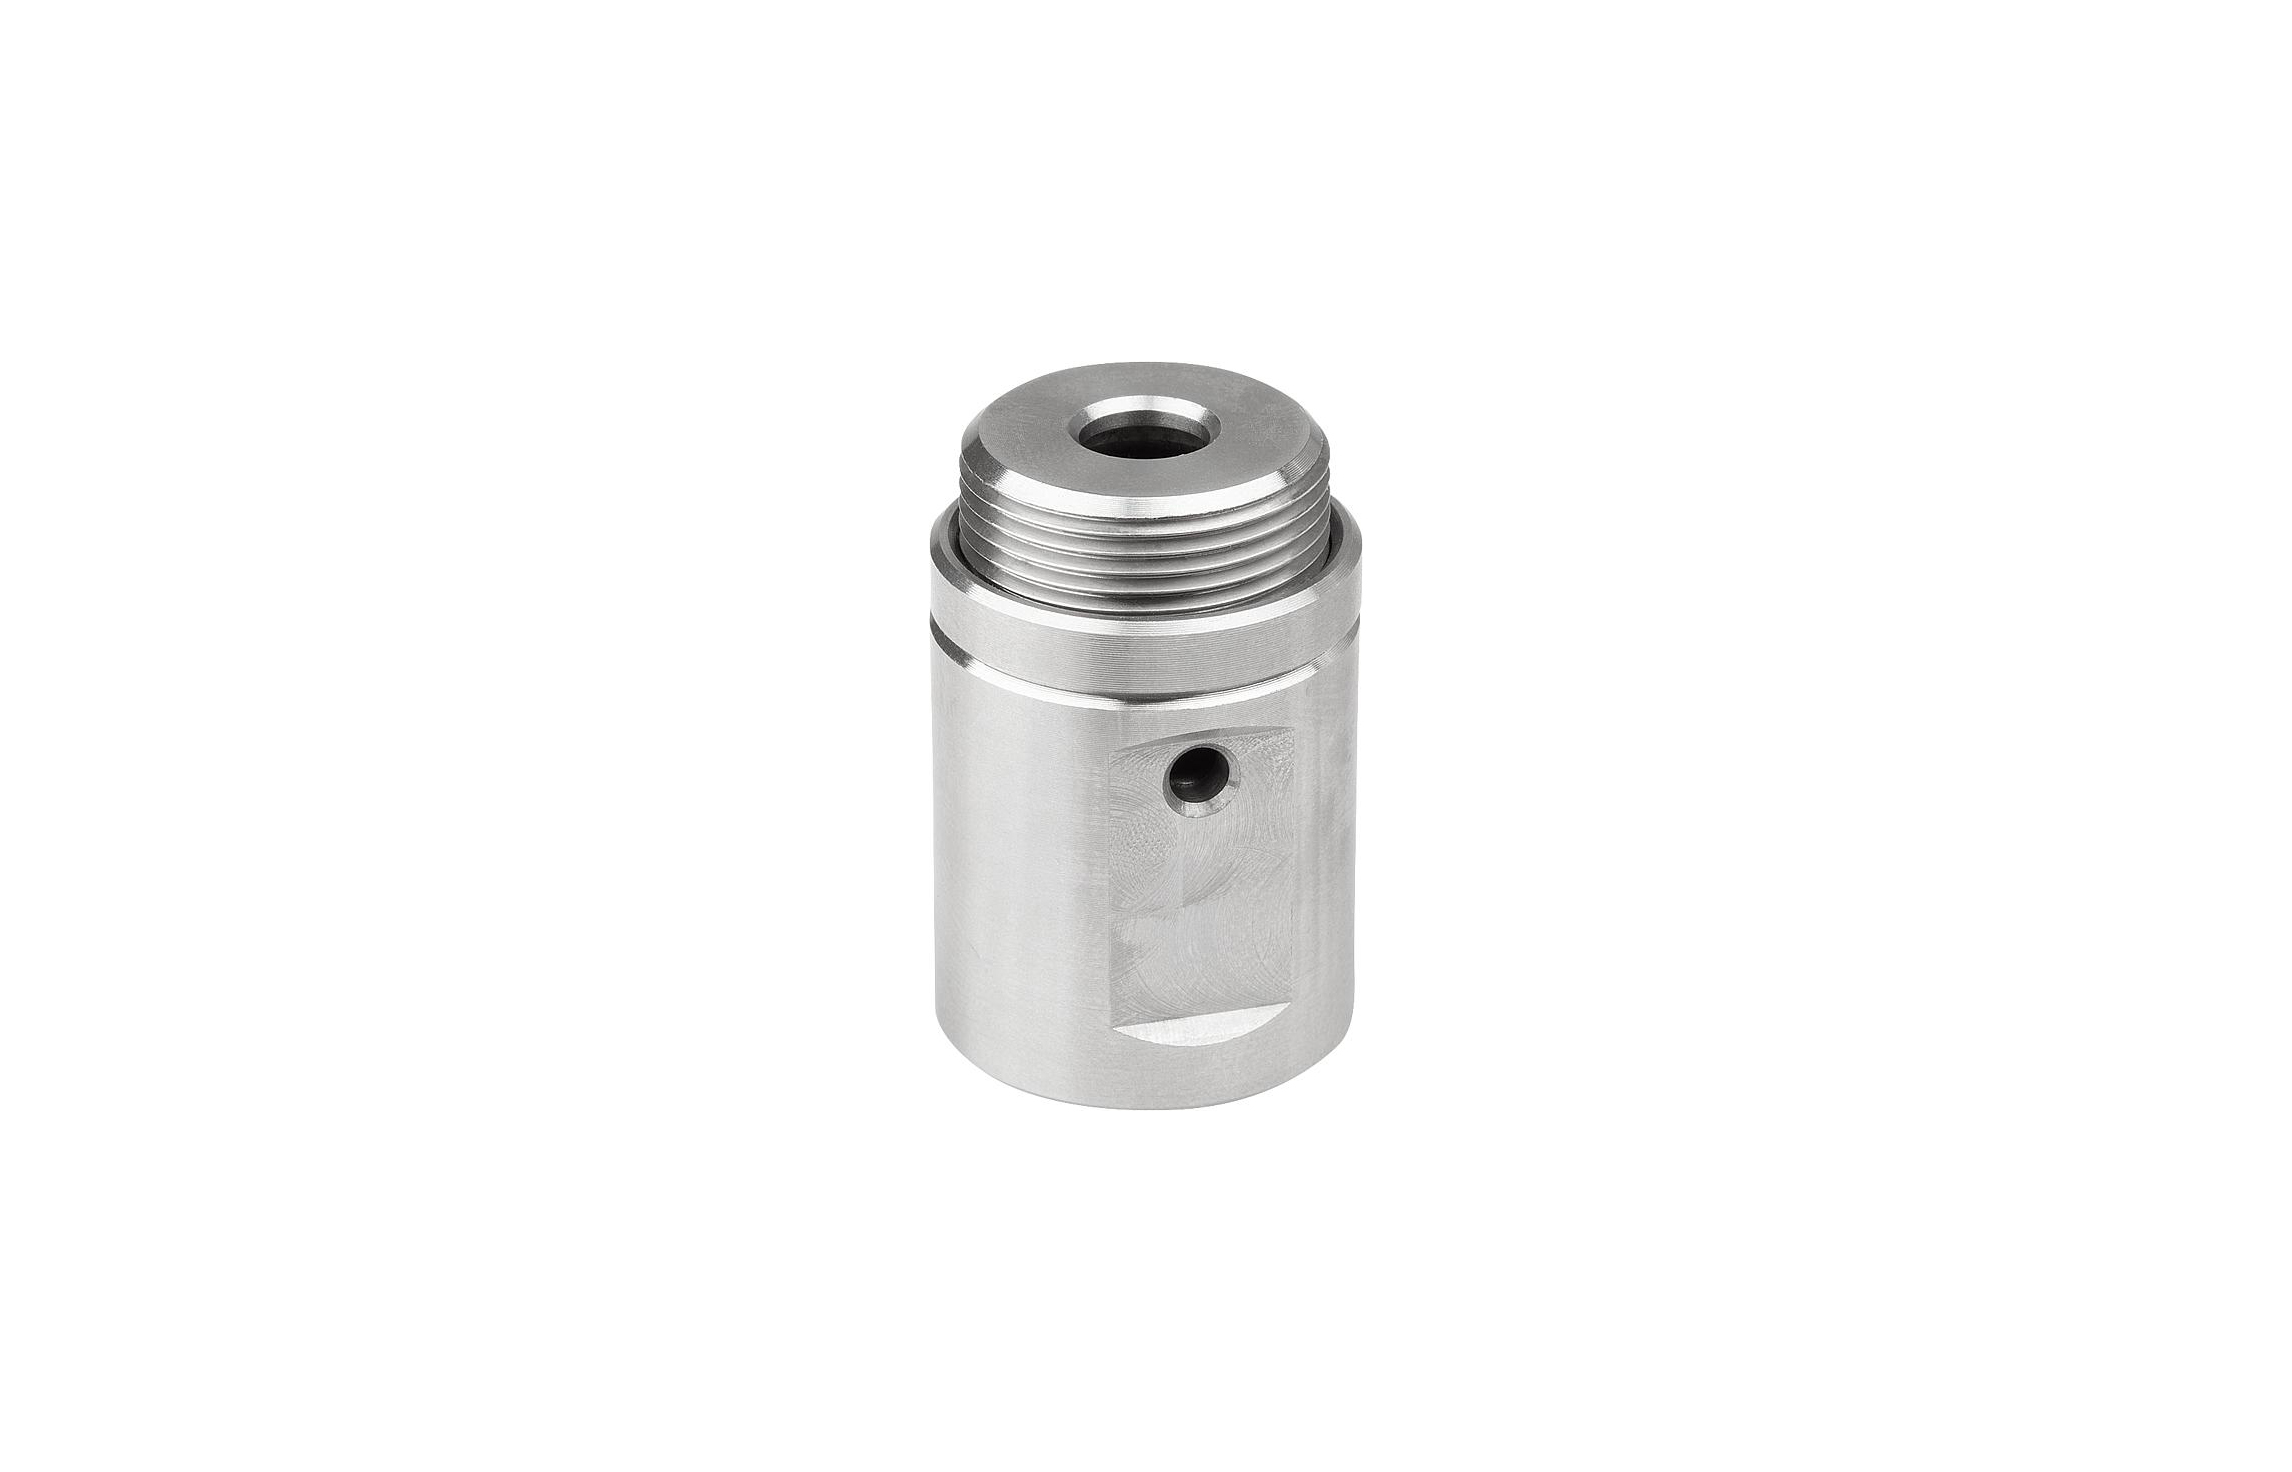 K1740 Locating adapters, cylindrical, stainless steel, pneumatic